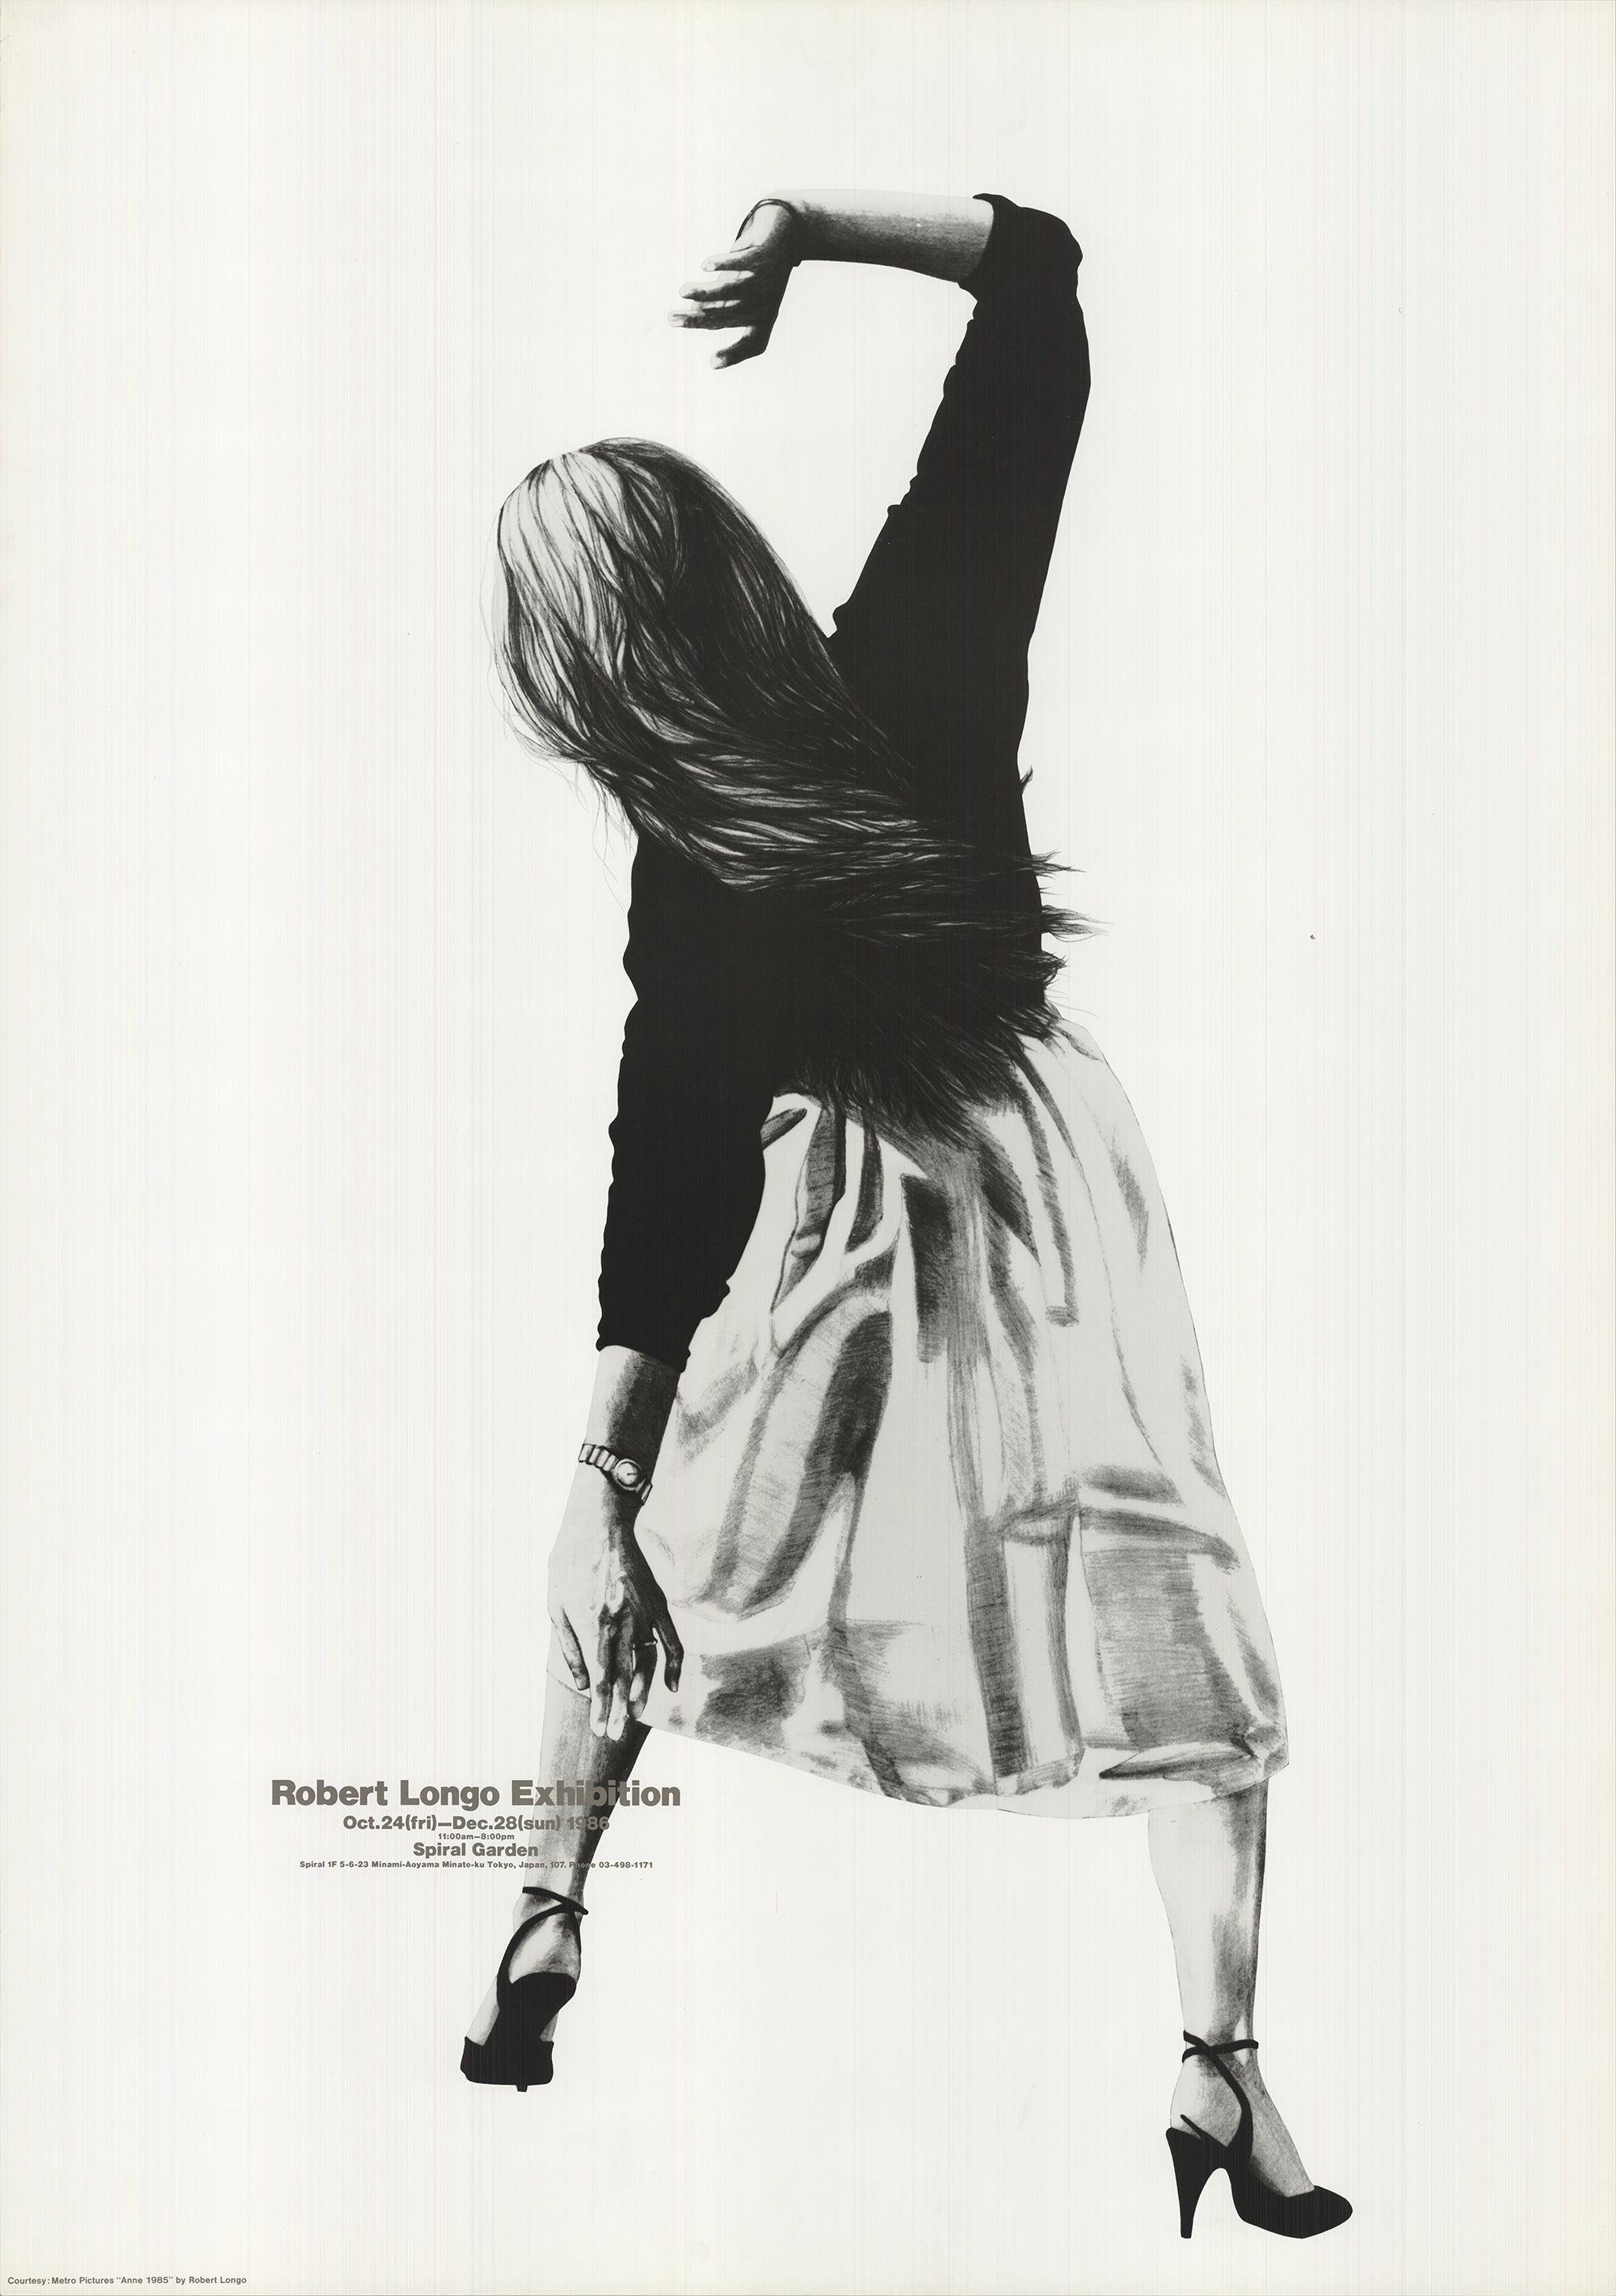 Sku: YY2931
Artist: Robert Longo
Title: Anne 1985
Year: 1986
Signed: No
Medium: Offset Lithograph
Paper Size: 33 x 23.5 inches ( 83.82 x 59.69 cm )
Image Size: 33 x 23.5 inches ( 83.82 x 59.69 cm )
Edition Size: Unknown
Framed: No
Condition: A-: